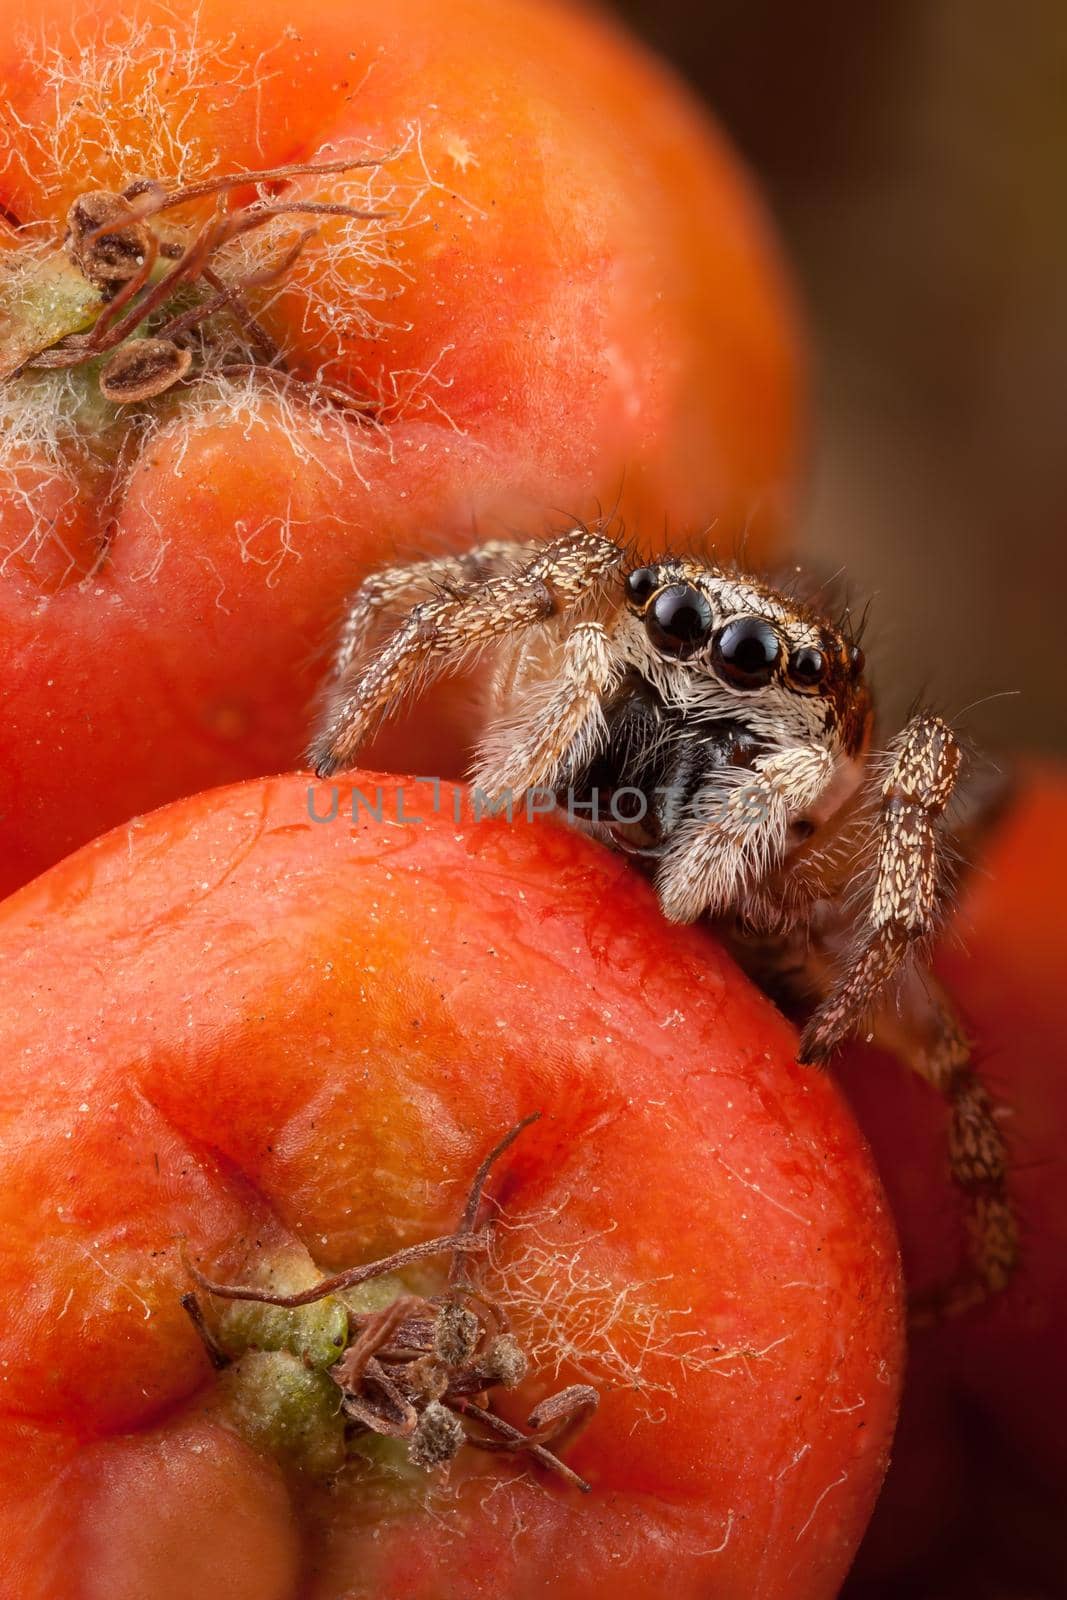 Little Jumping spider close up and orange rowan fruit